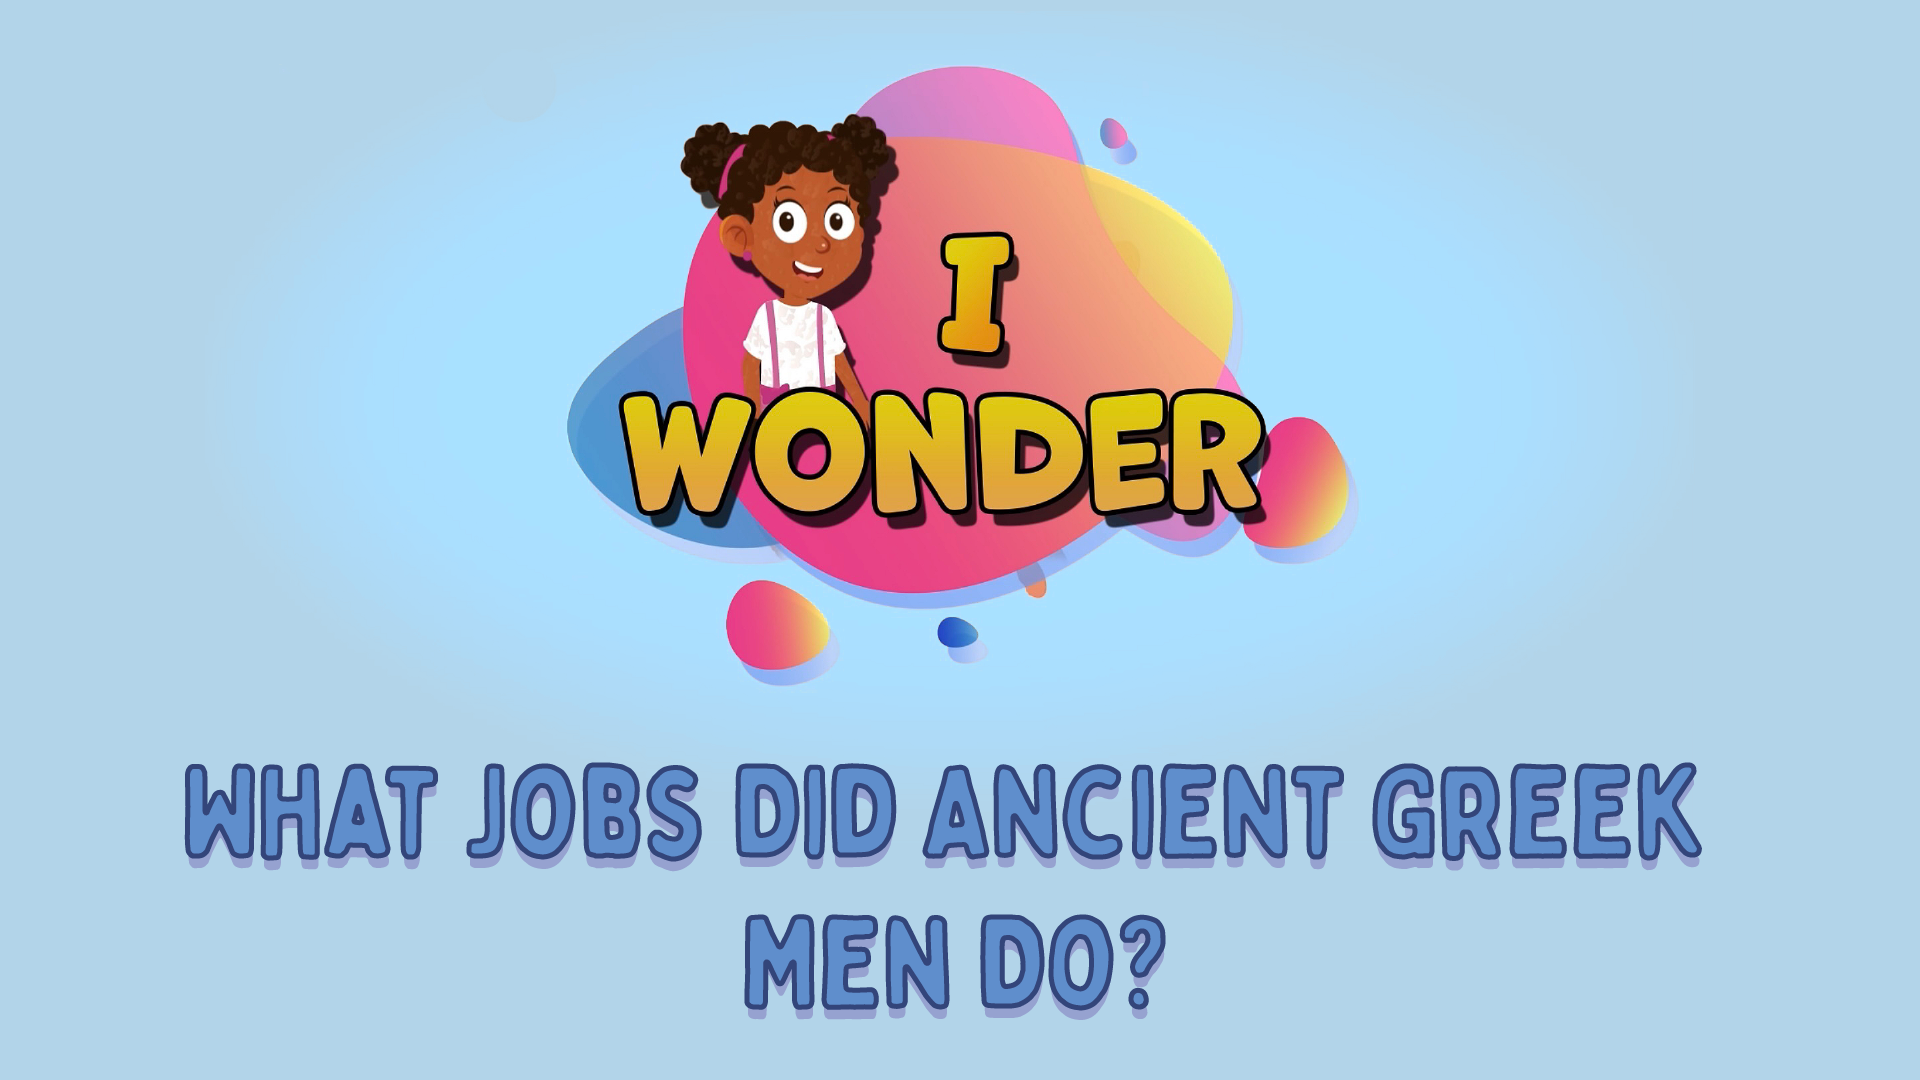 What Jobs Did Ancient Greek Men Do?